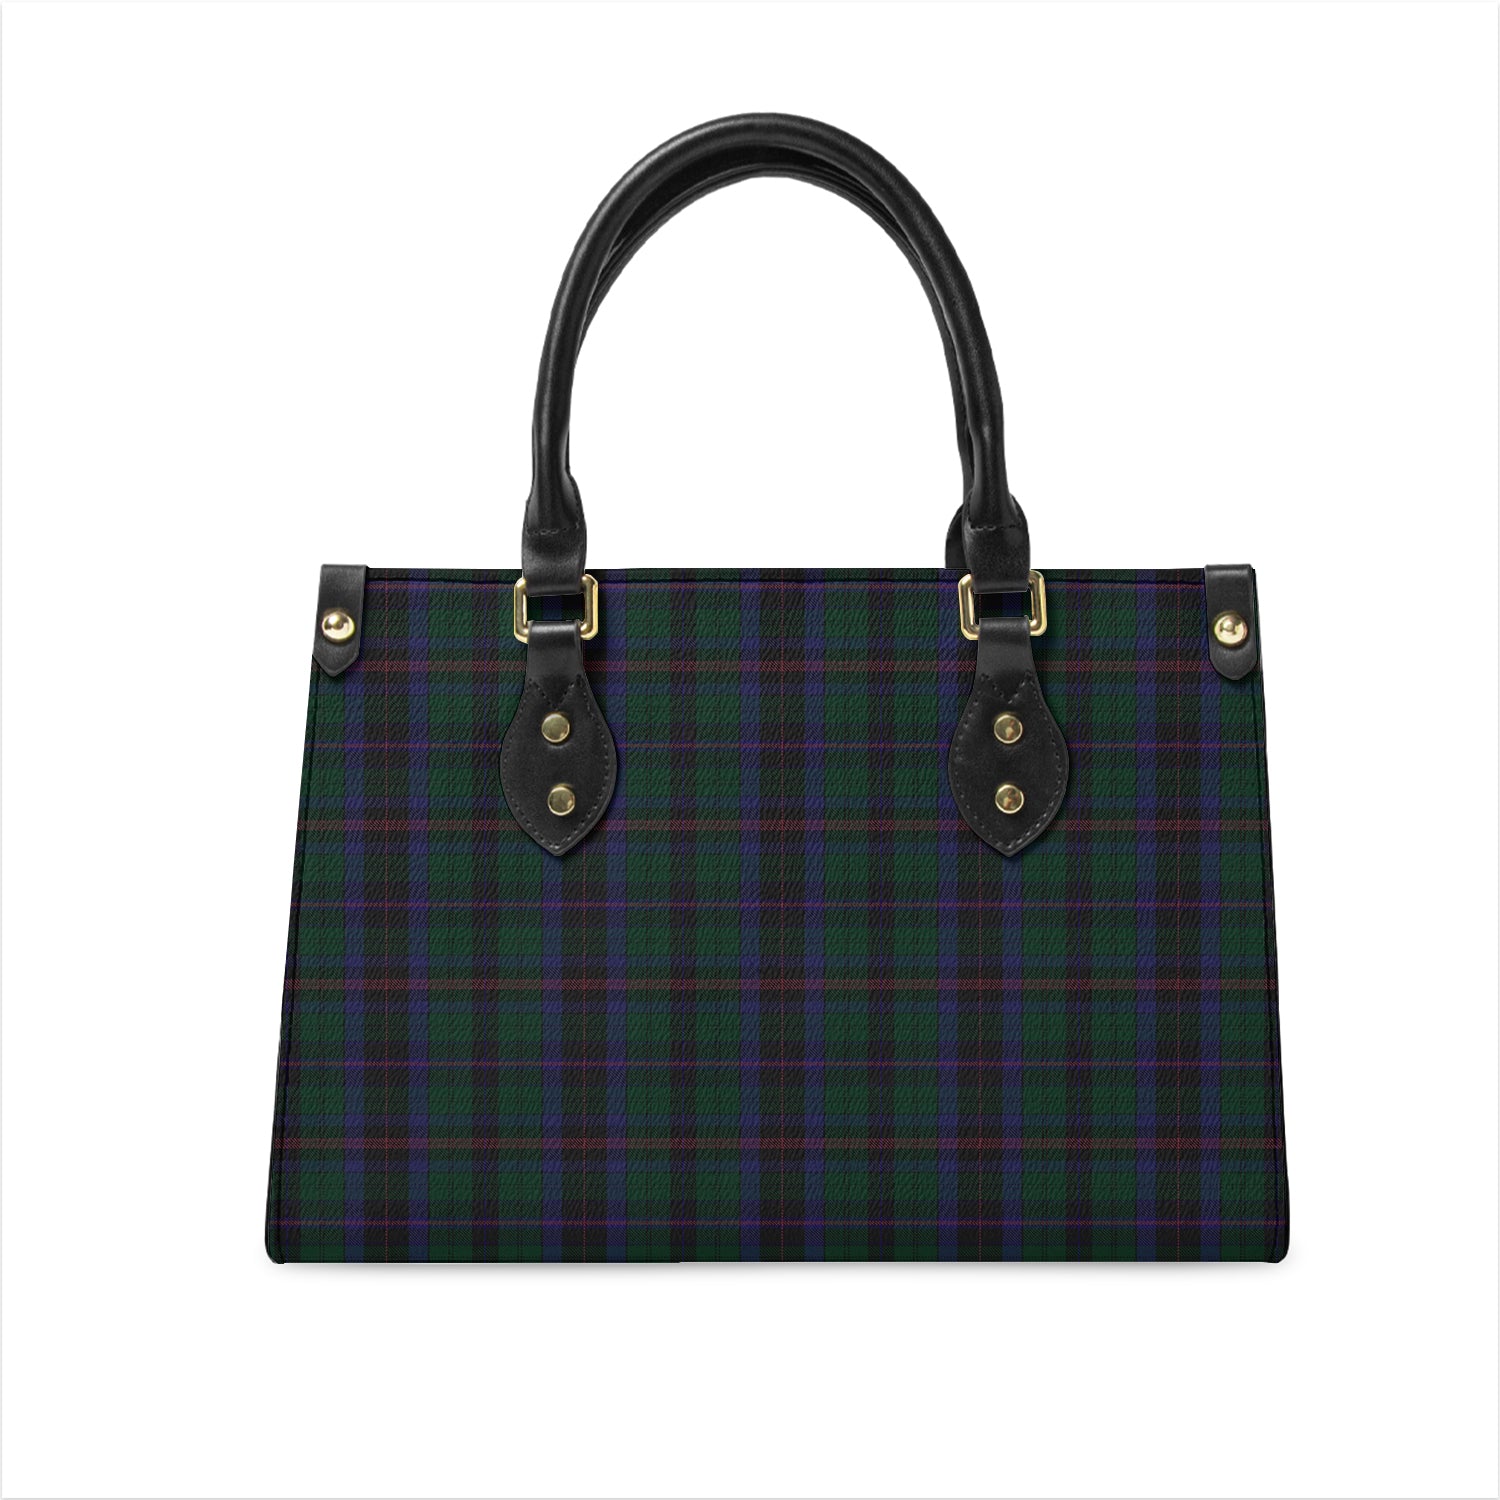 phillips-of-wales-tartan-leather-bag